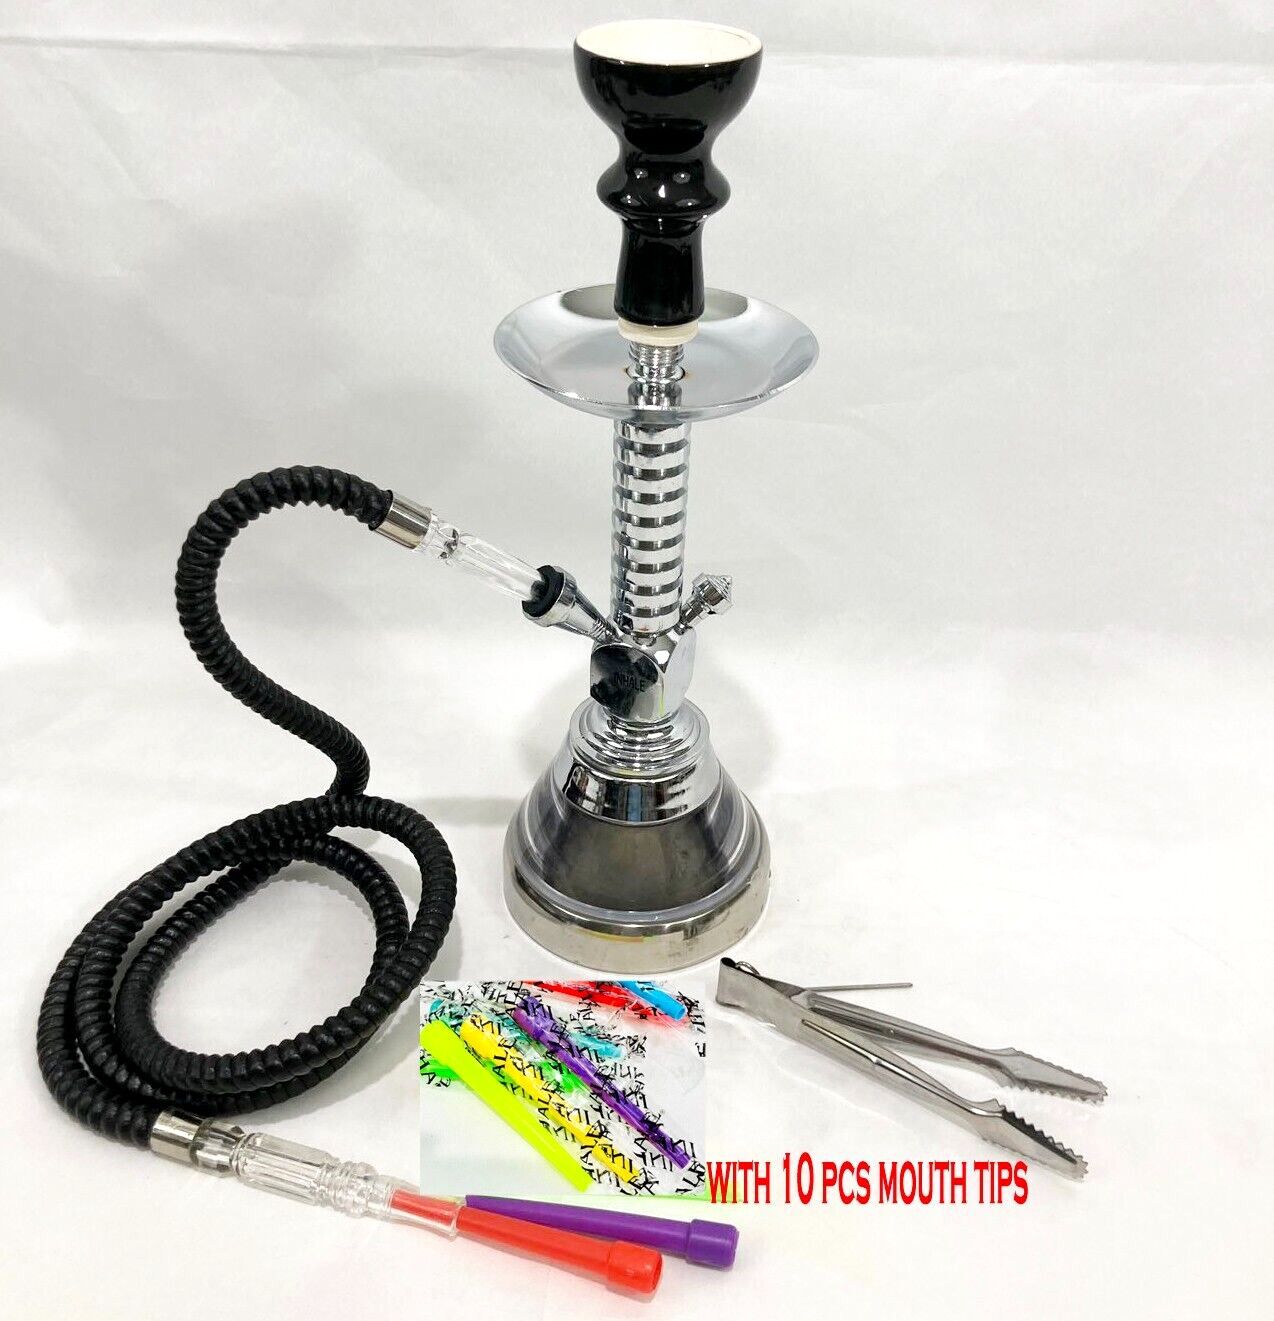 INHALE 15’’ HEAVY DUTY  stable set 1 hose hookah with 10 PCS mouth tips